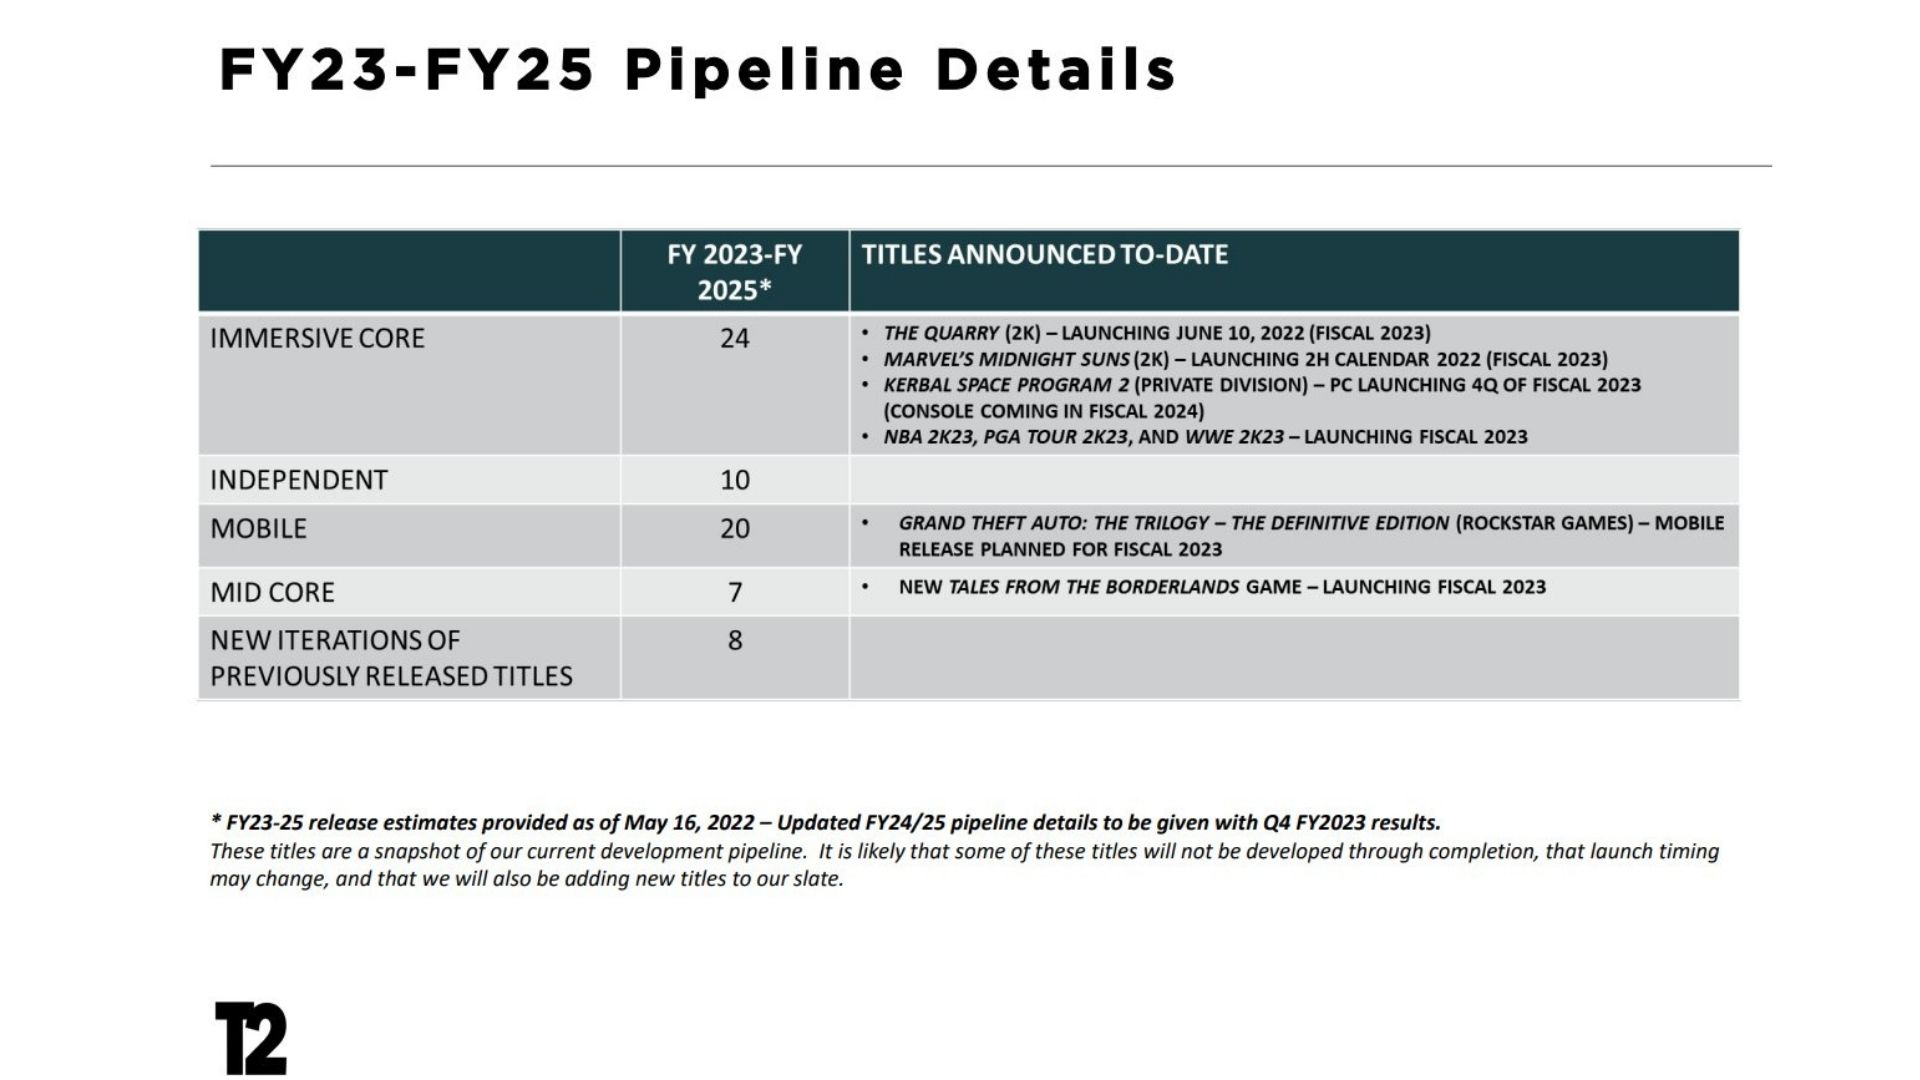 take-two-release-slips-FY2023-2025